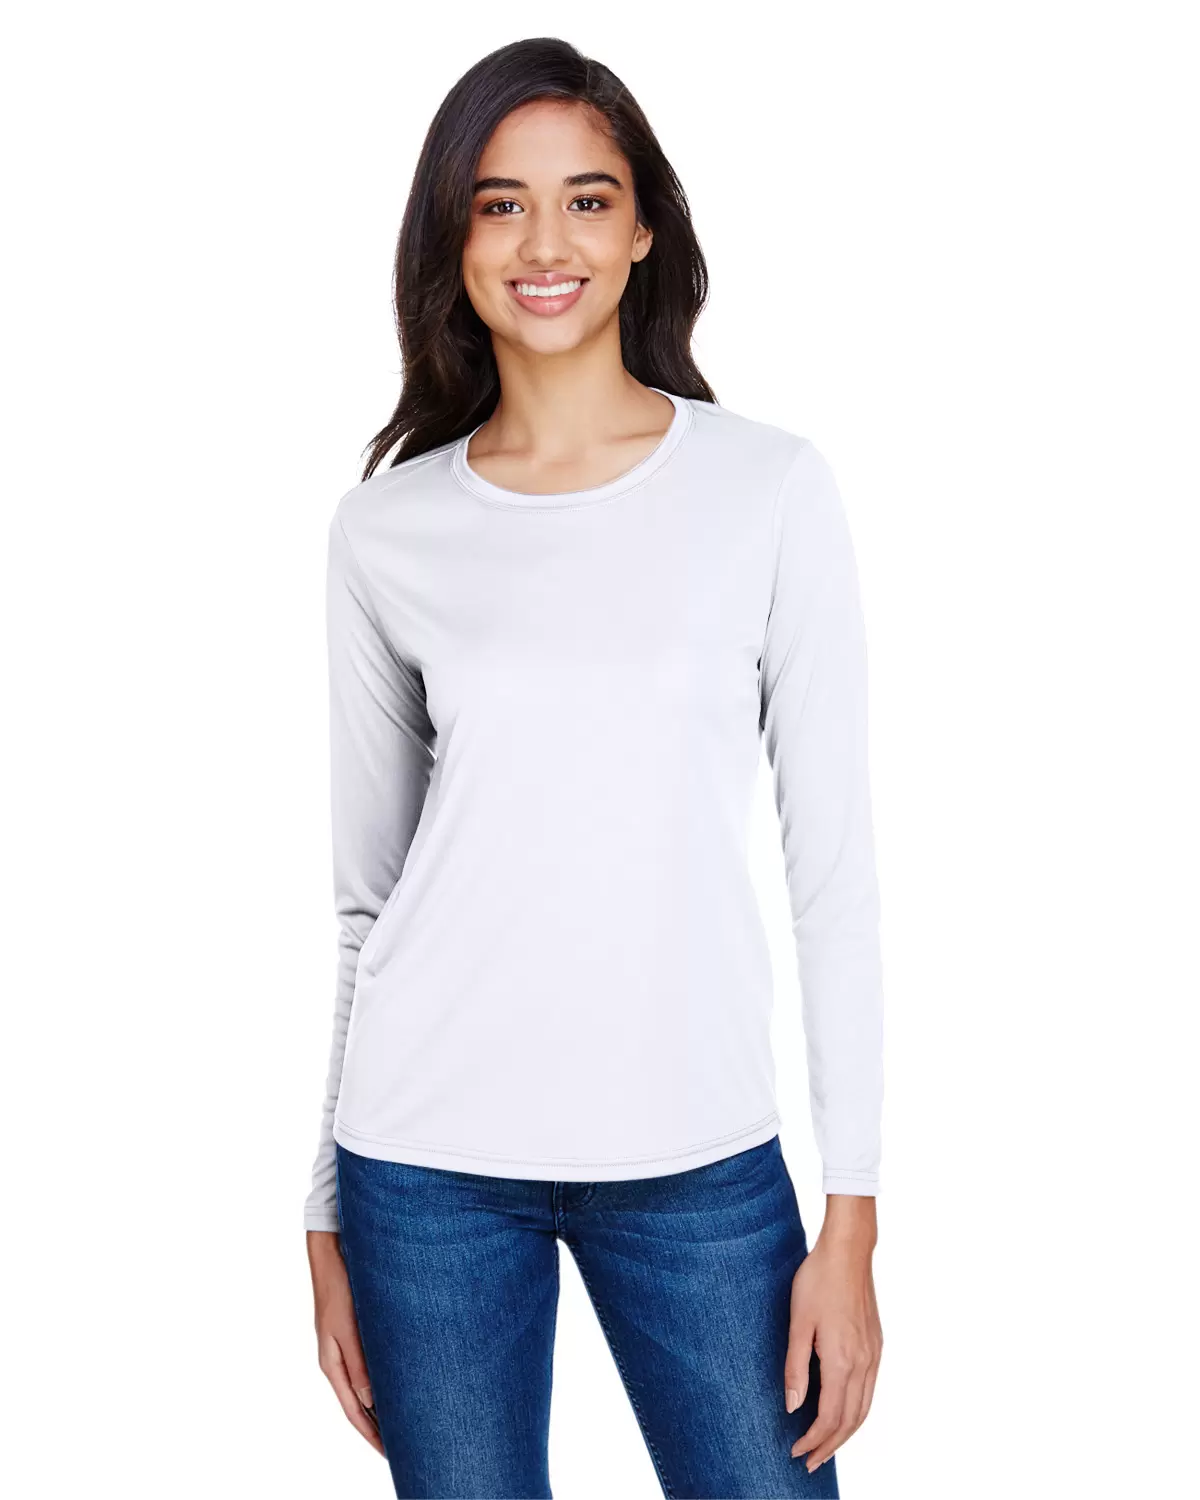 NW3002 A4 Women's Long Sleeve Cooling Performance Crew - From $6.62